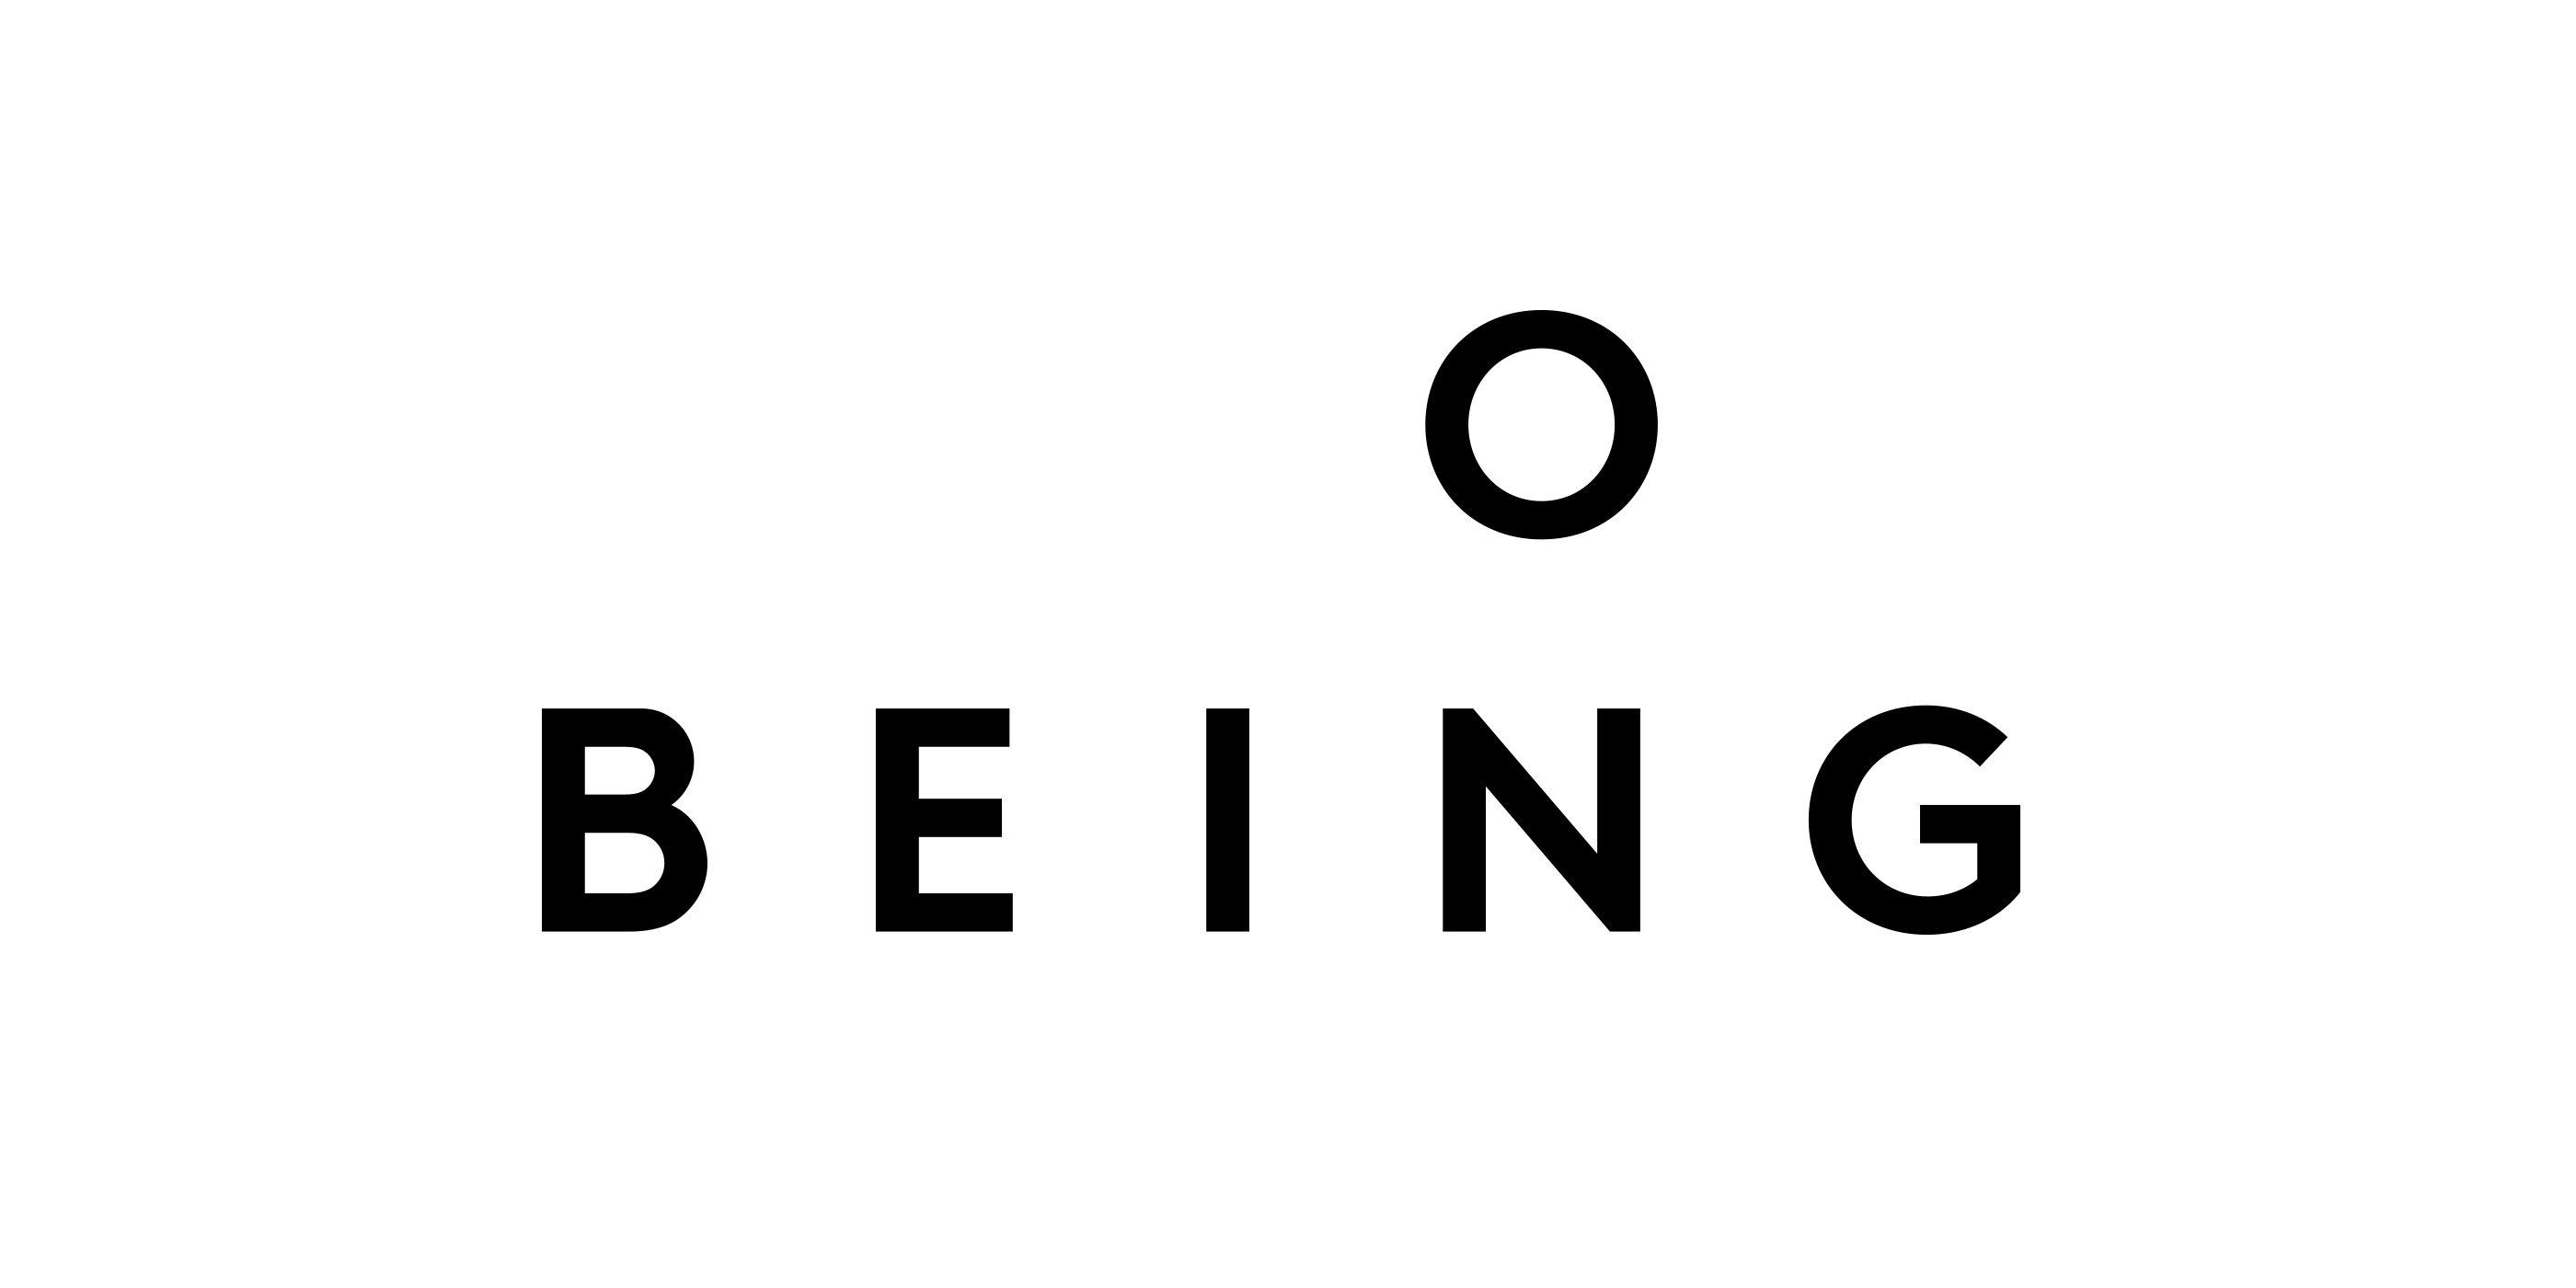 Becoming Logo - File:On Being Logo.jpg - Wikimedia Commons